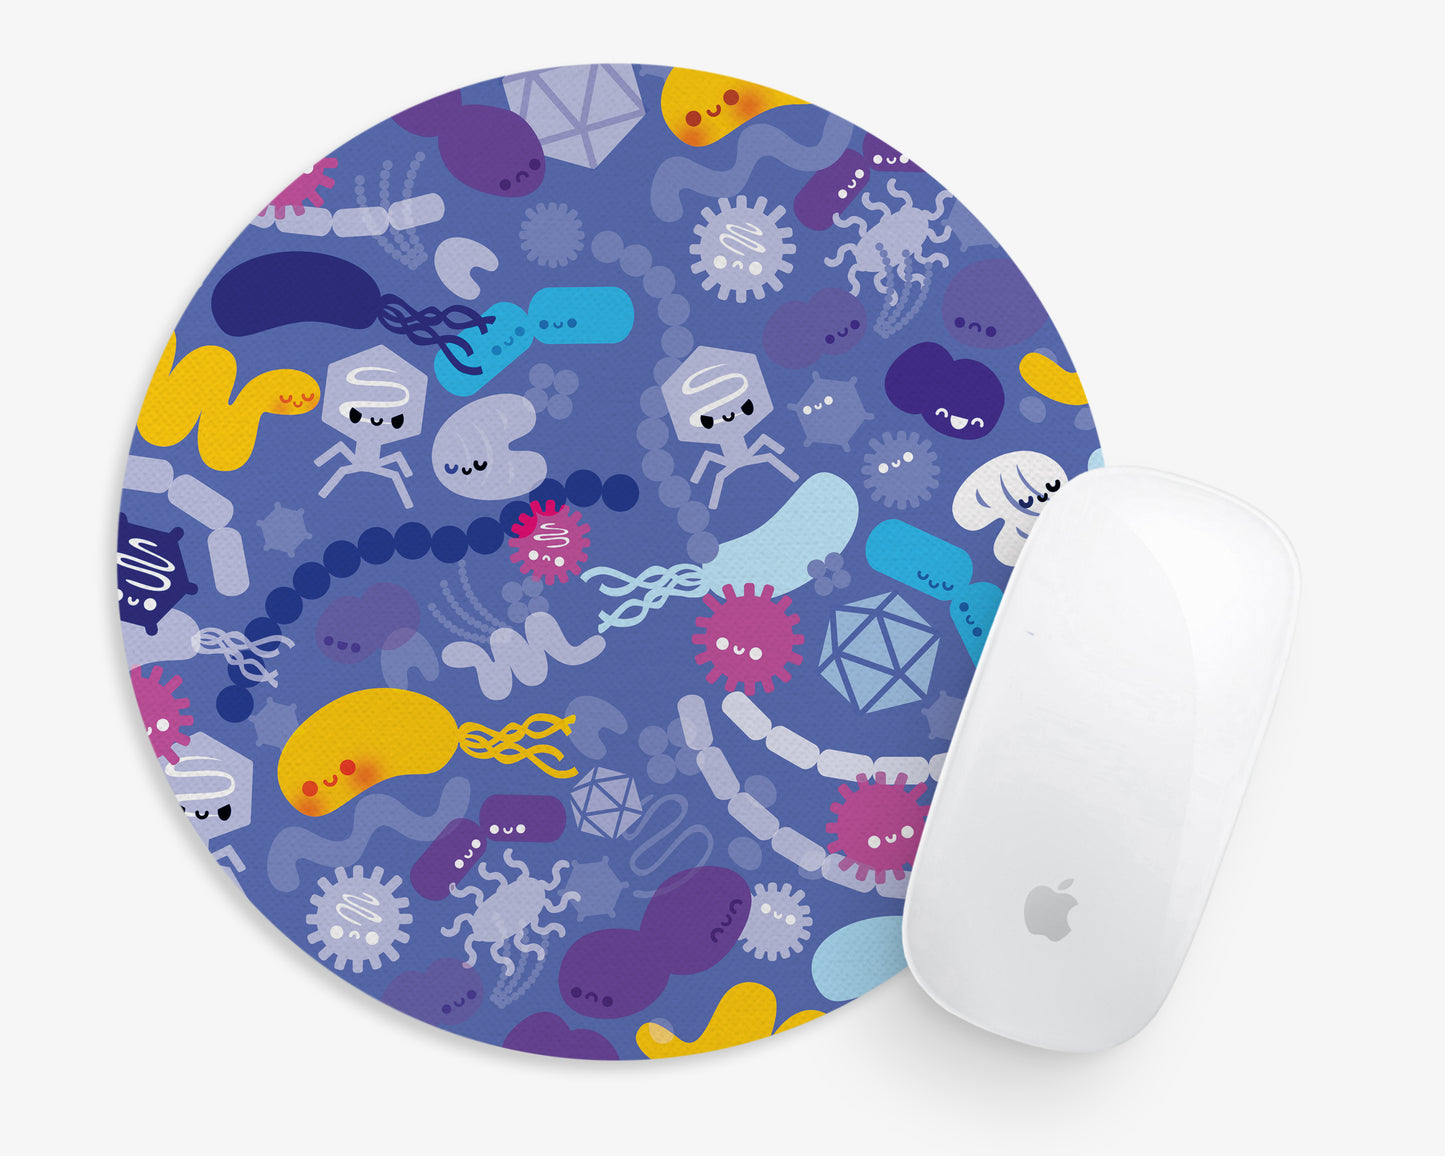 Microbiology Round Mouse Pad